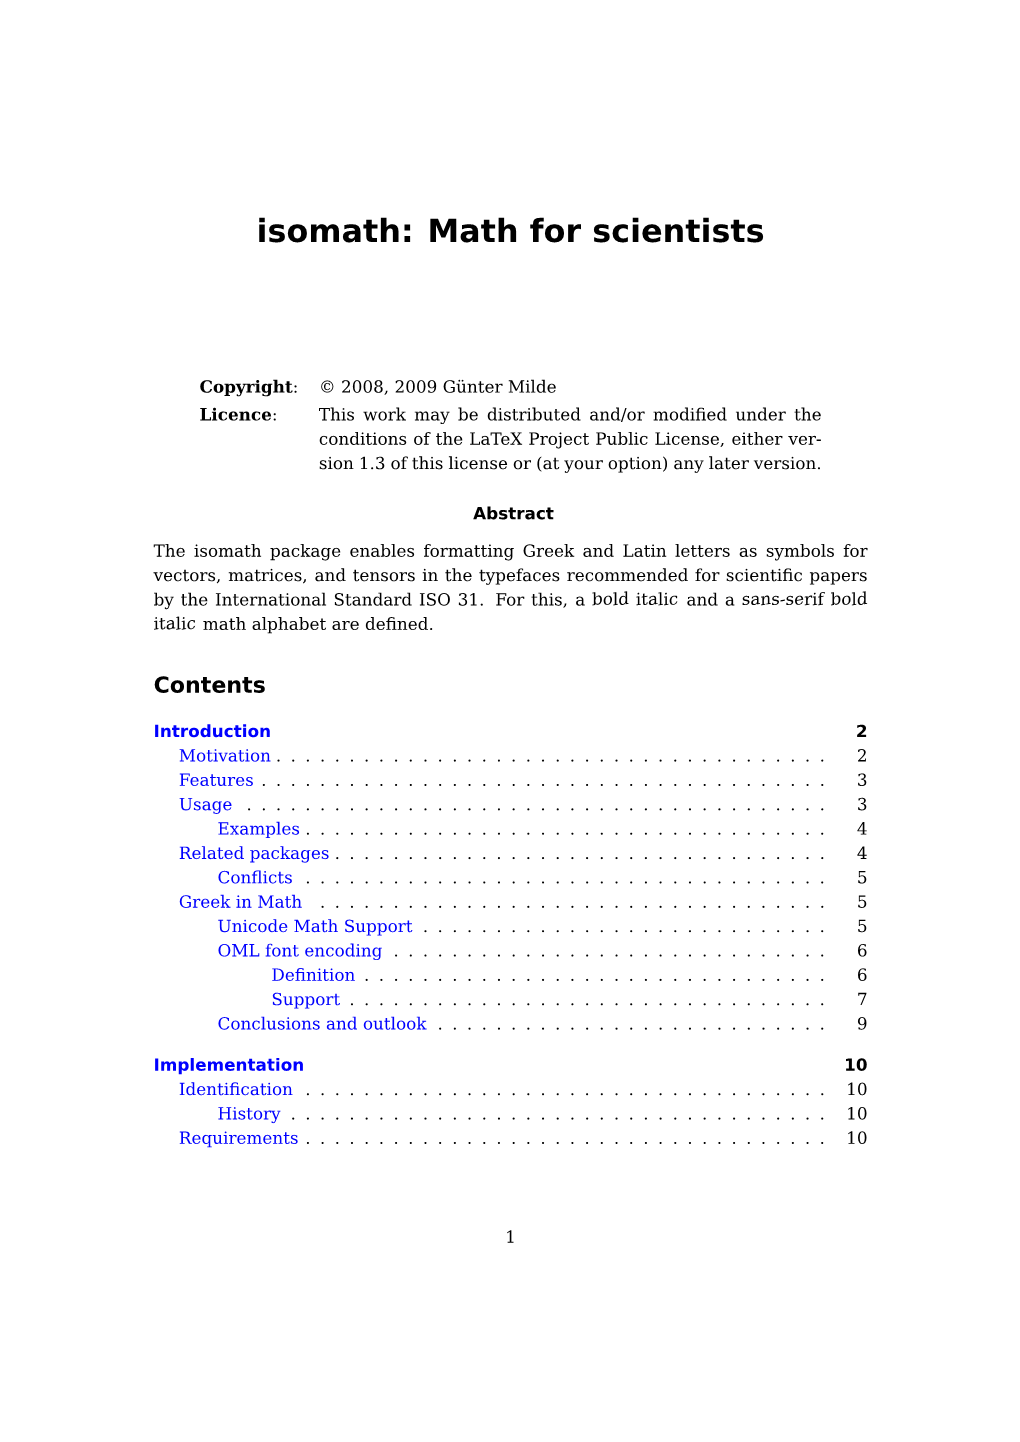 Isomath: Math for Scientists